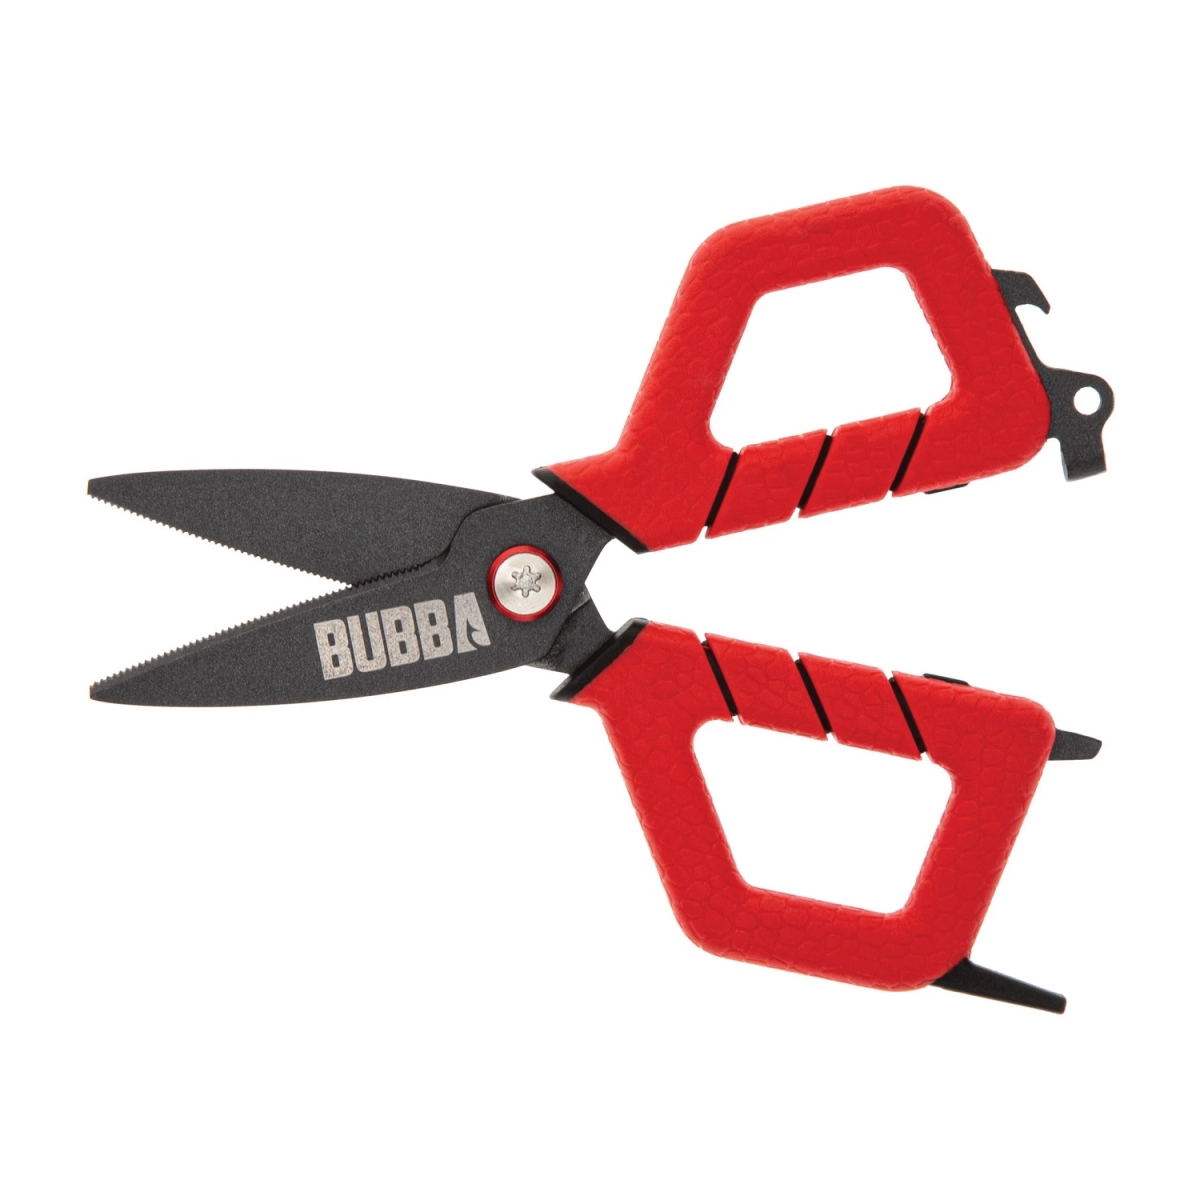 Picture of Bubba 4020104 2 in. Small Shears